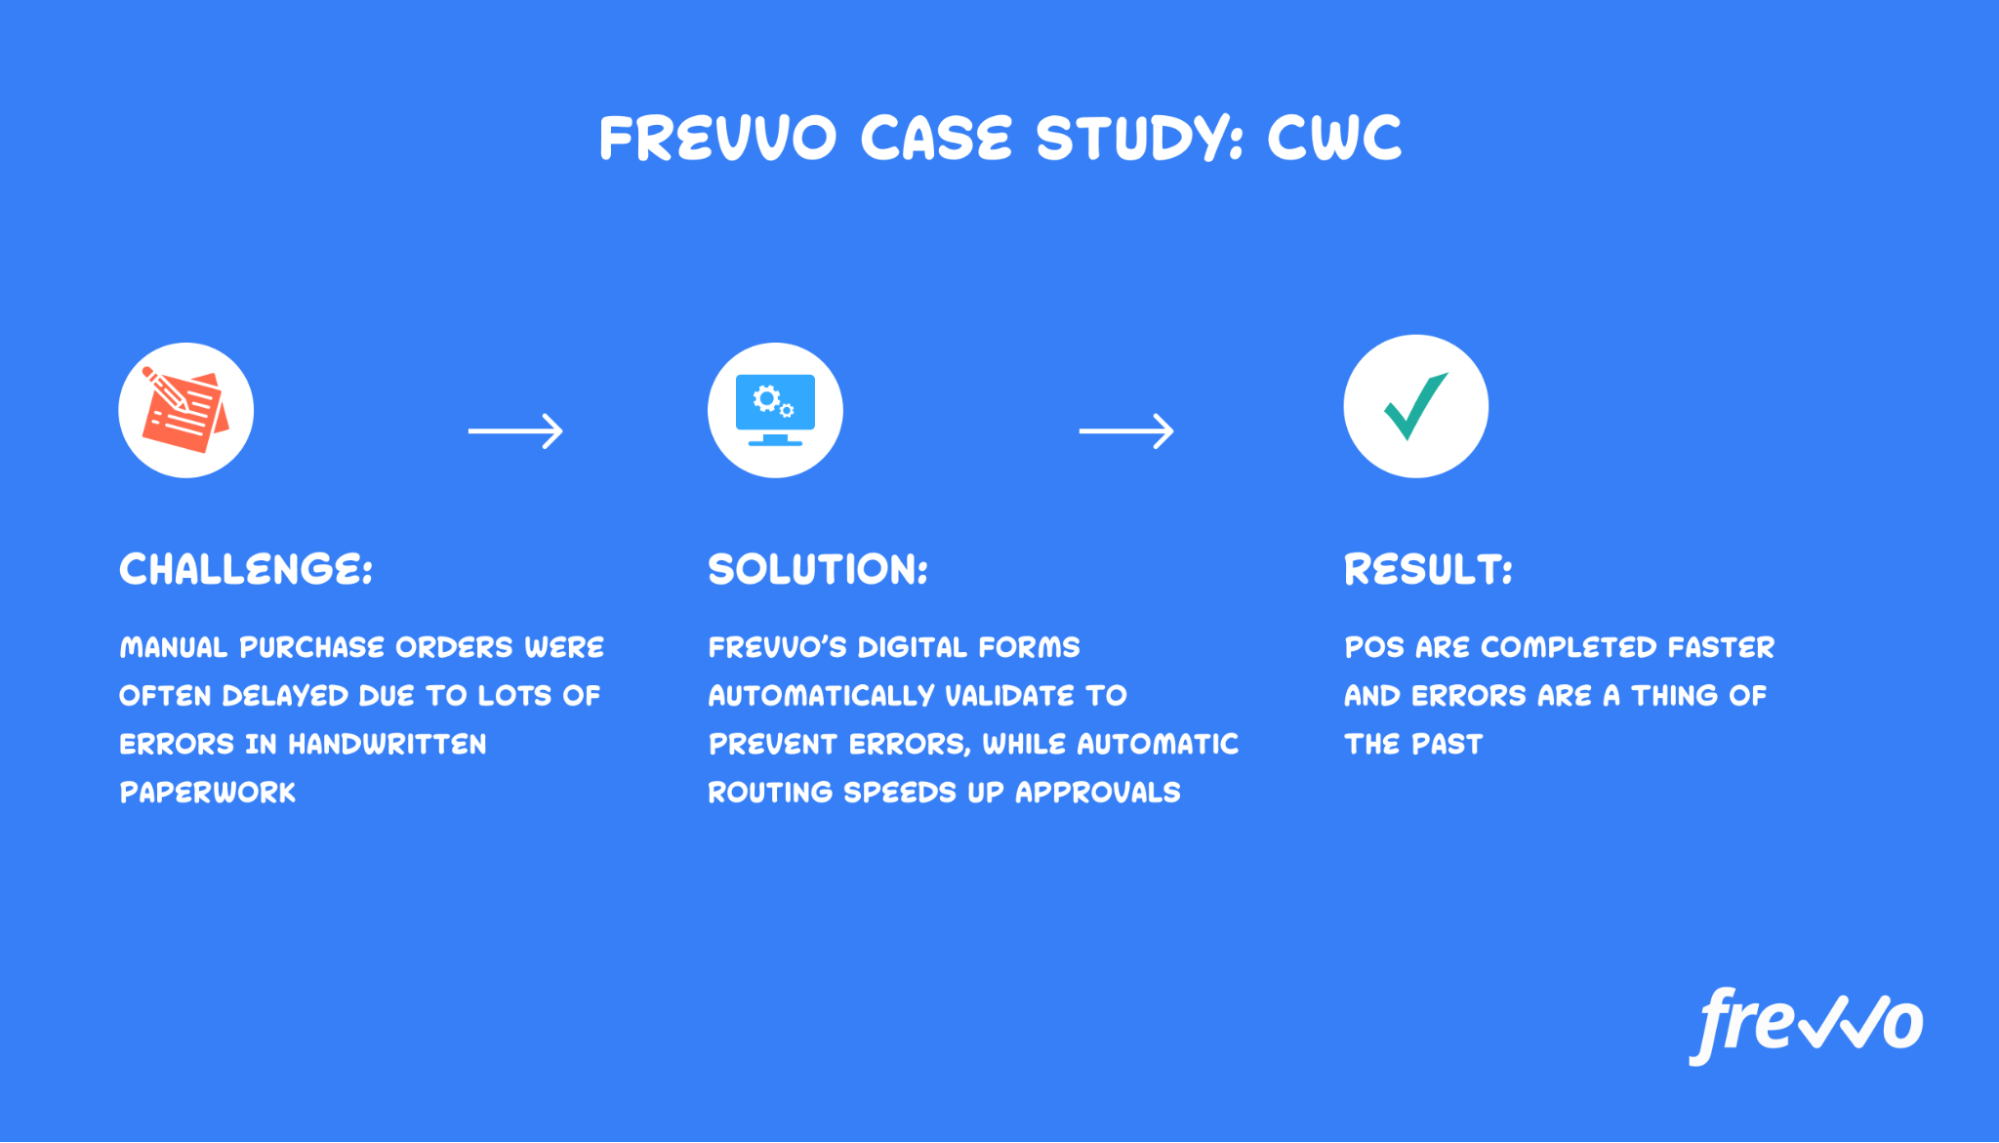 case study of CWC using frevvo